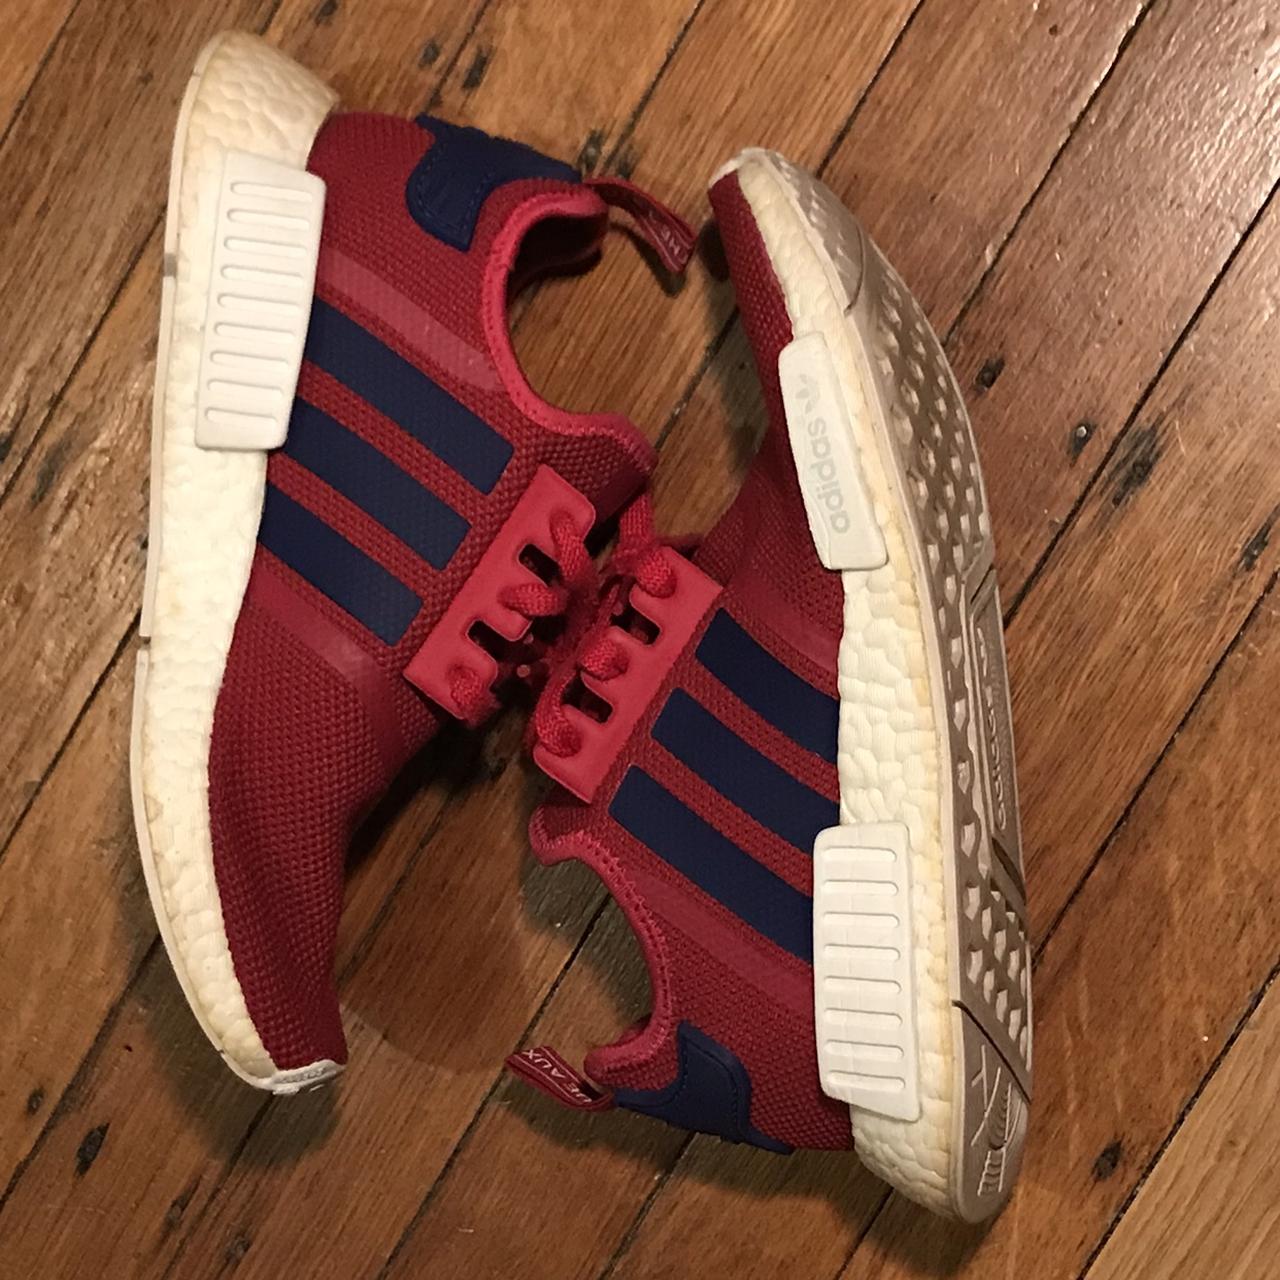 Adidas Women's Pink and White Trainers - 2